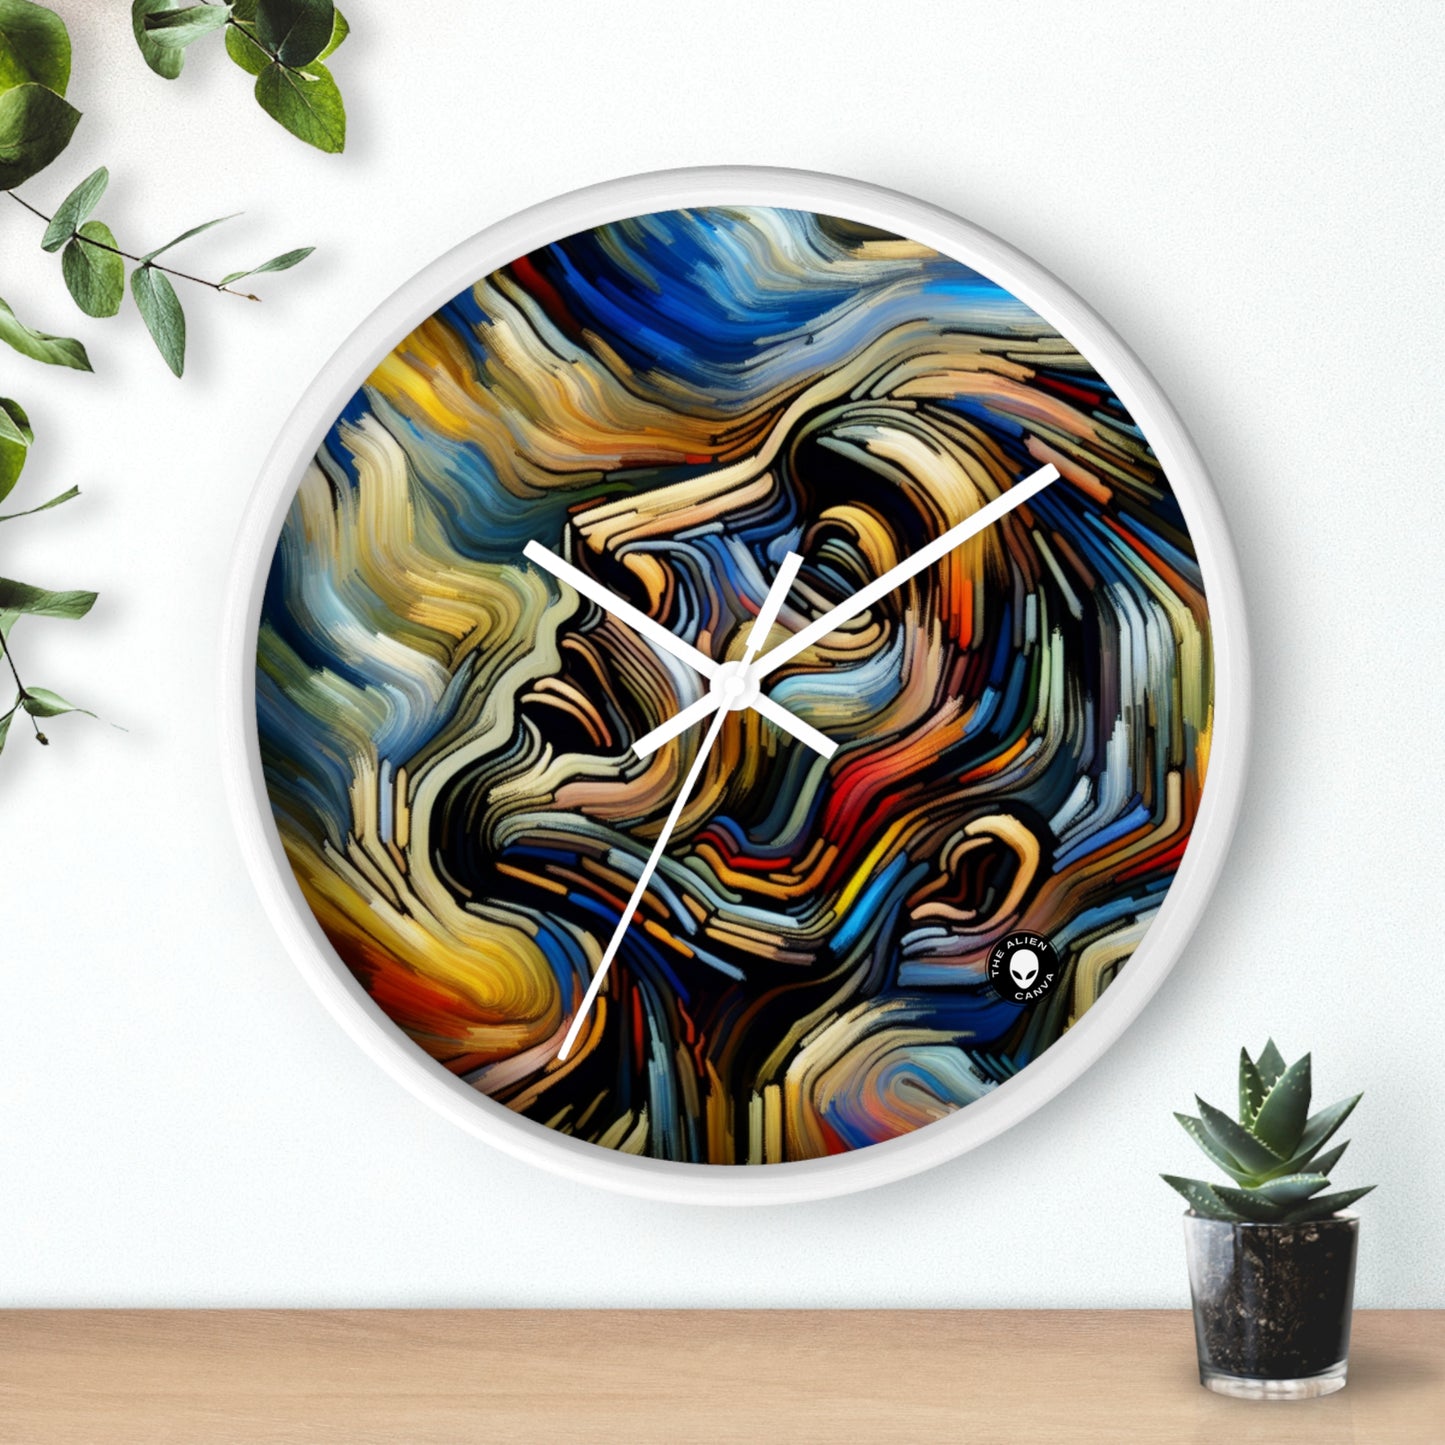 Title: "Tempestuous Waters" - The Alien Wall Clock Expressionism